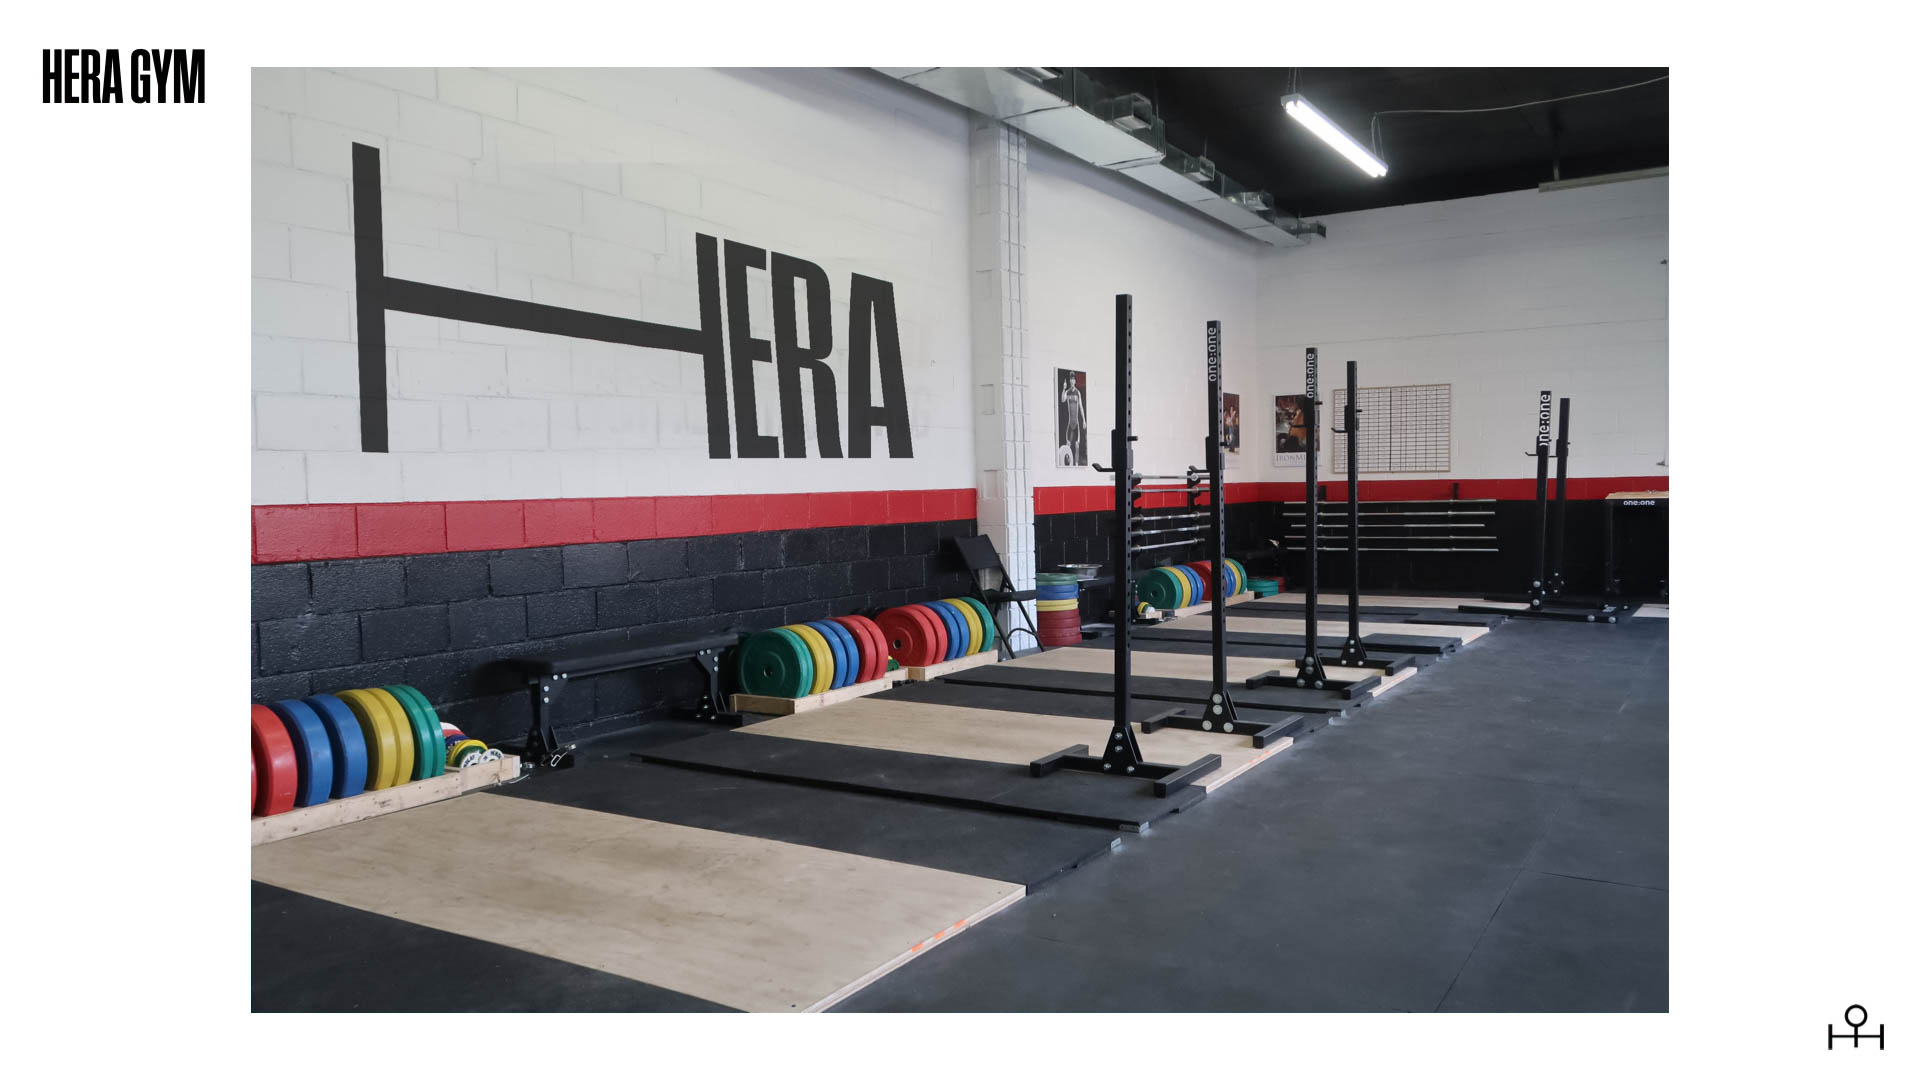 interior of weight room/gym with Hera logo on wall